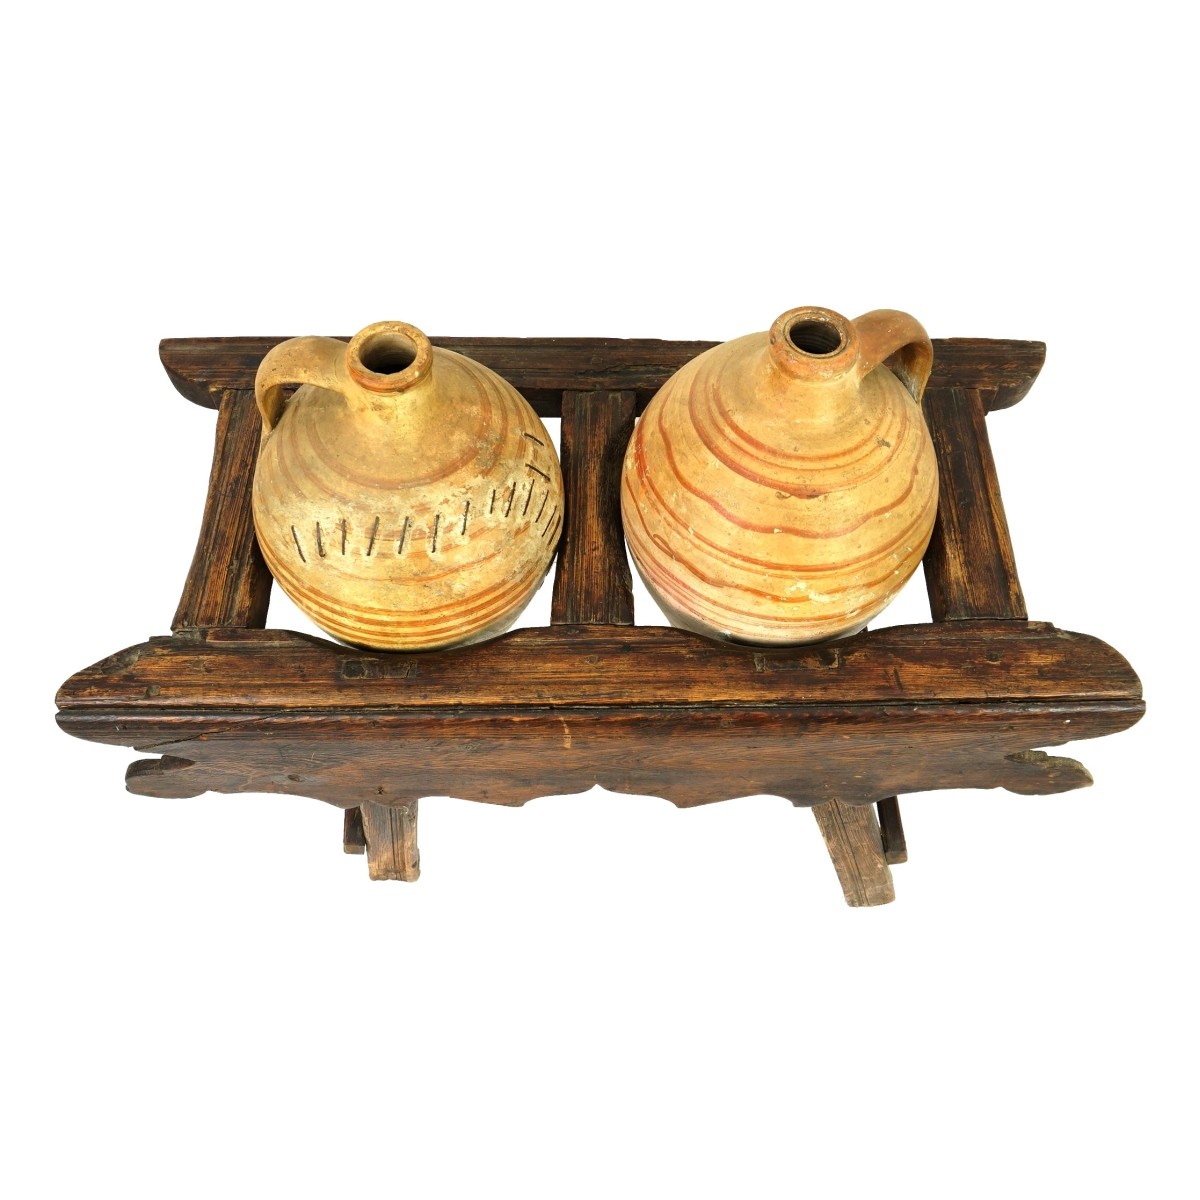 Antique Jugs on Wooden Stand